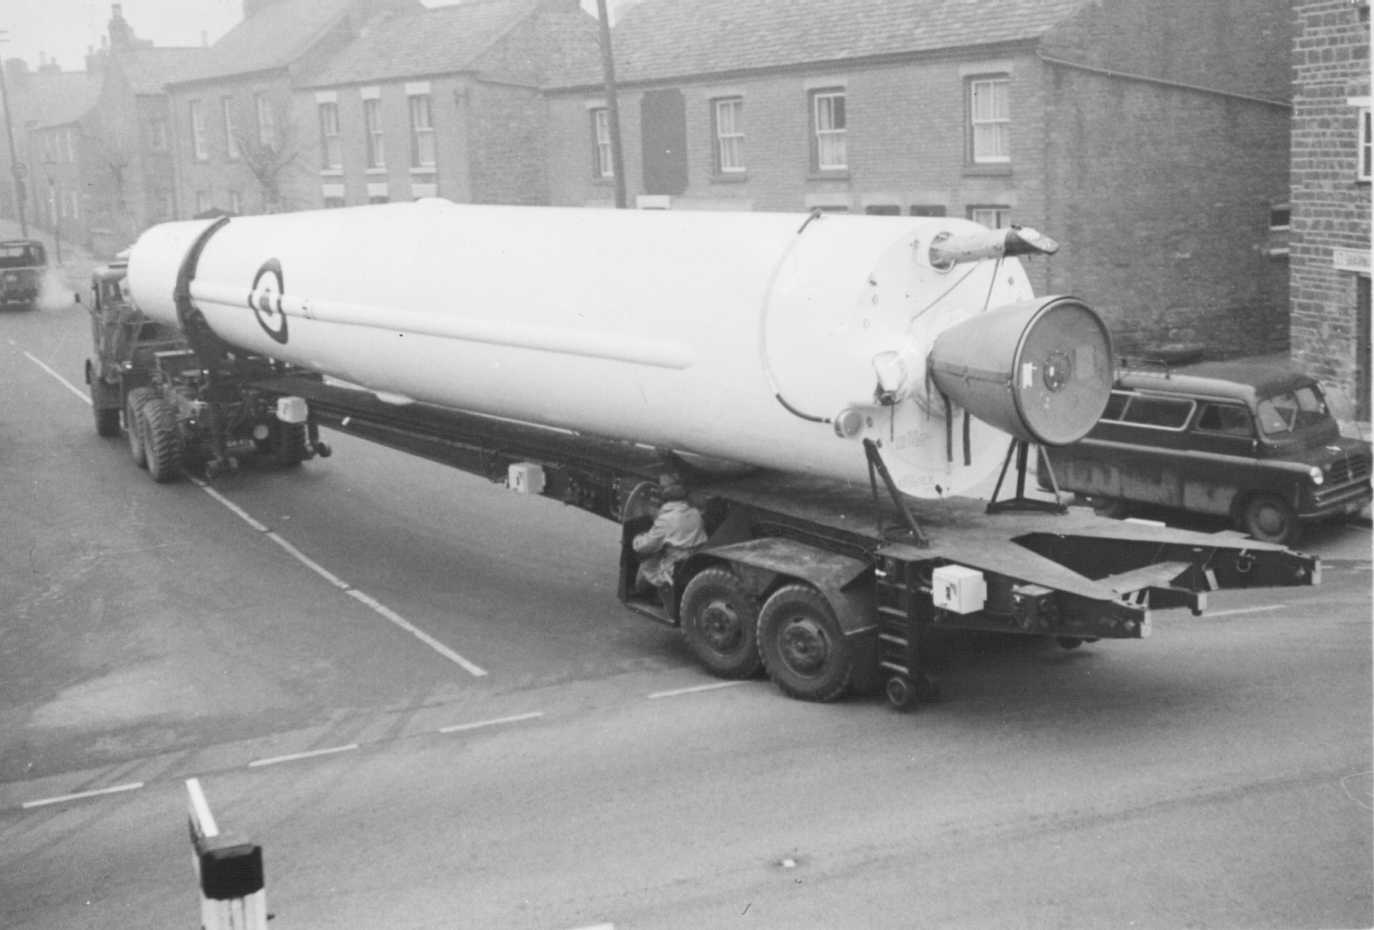 Thor missile Number 51 on its launching trailer in Harrington Road at Rothwell